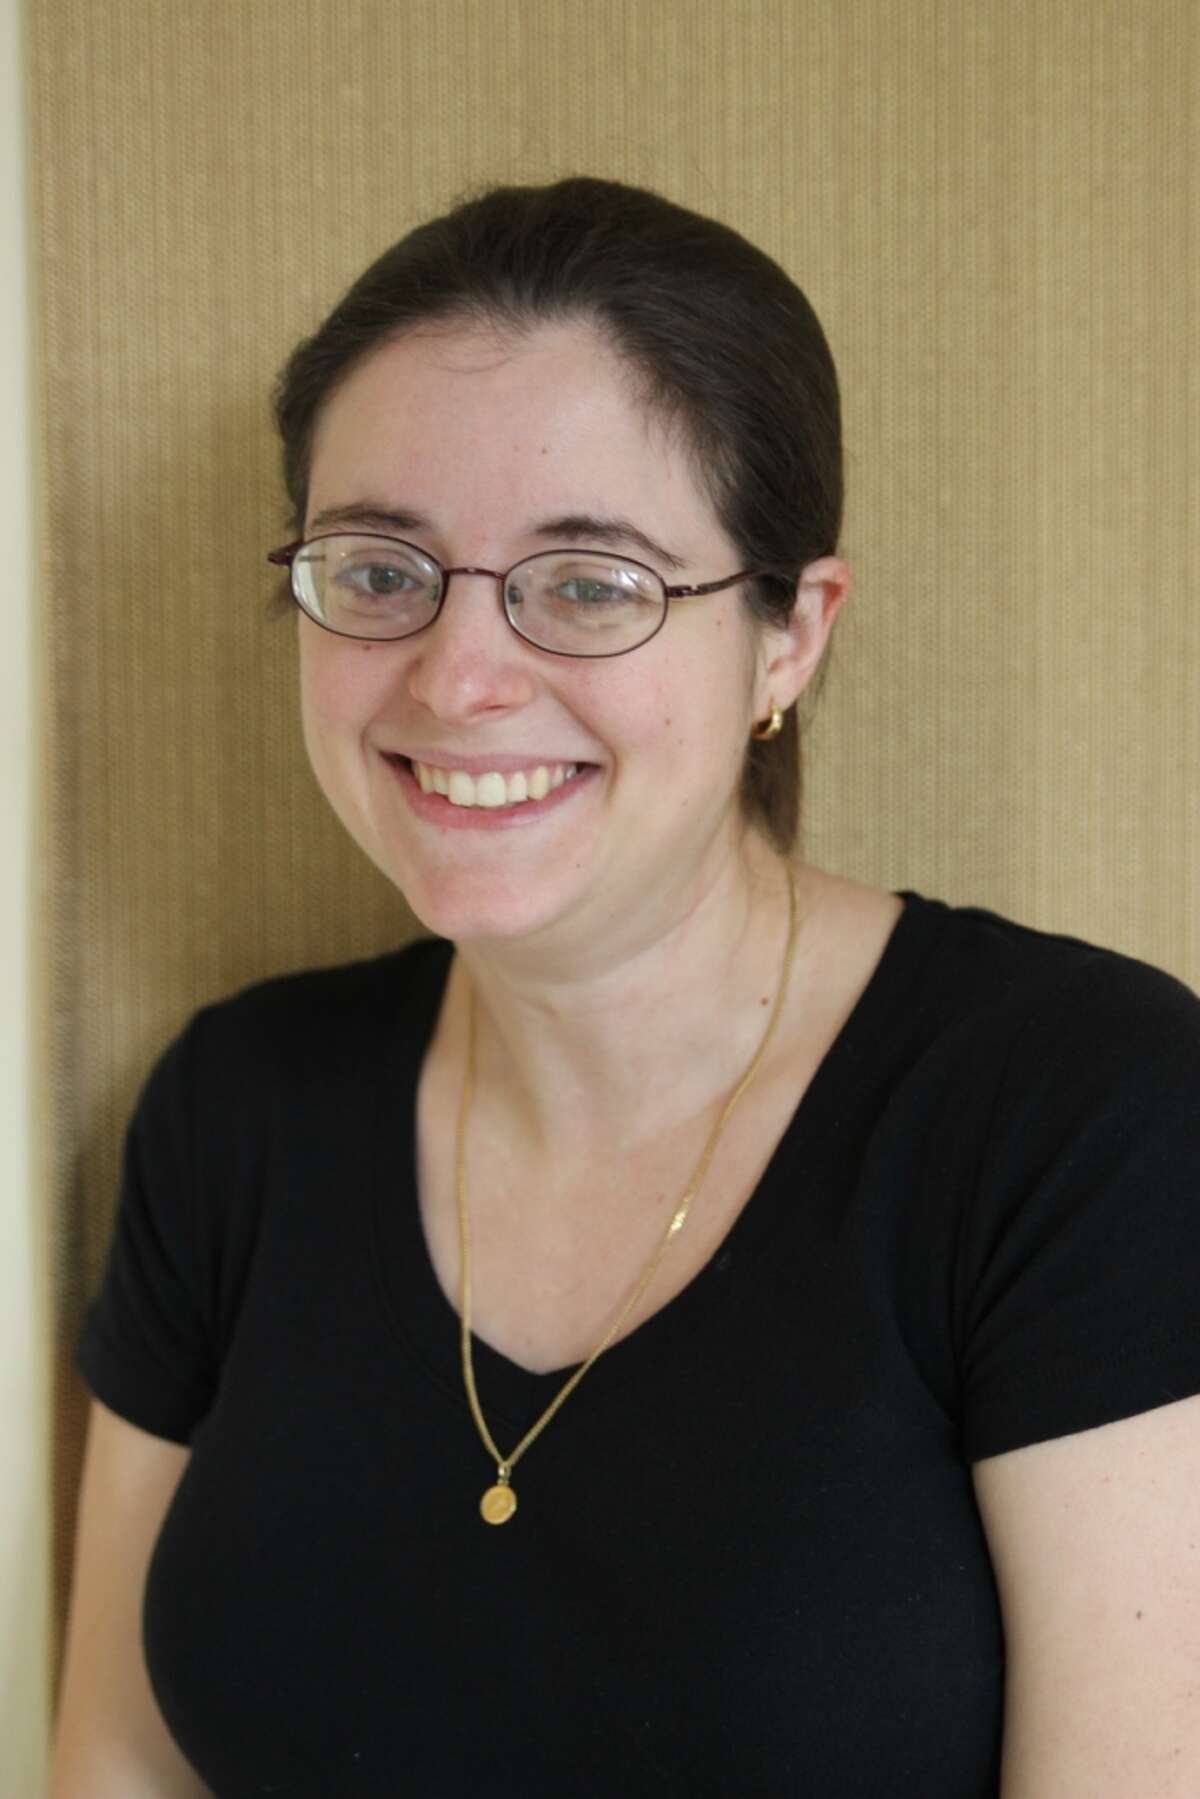 Jennifer Young came to Rice in 2010 with degrees from Delaware and North Carolina.